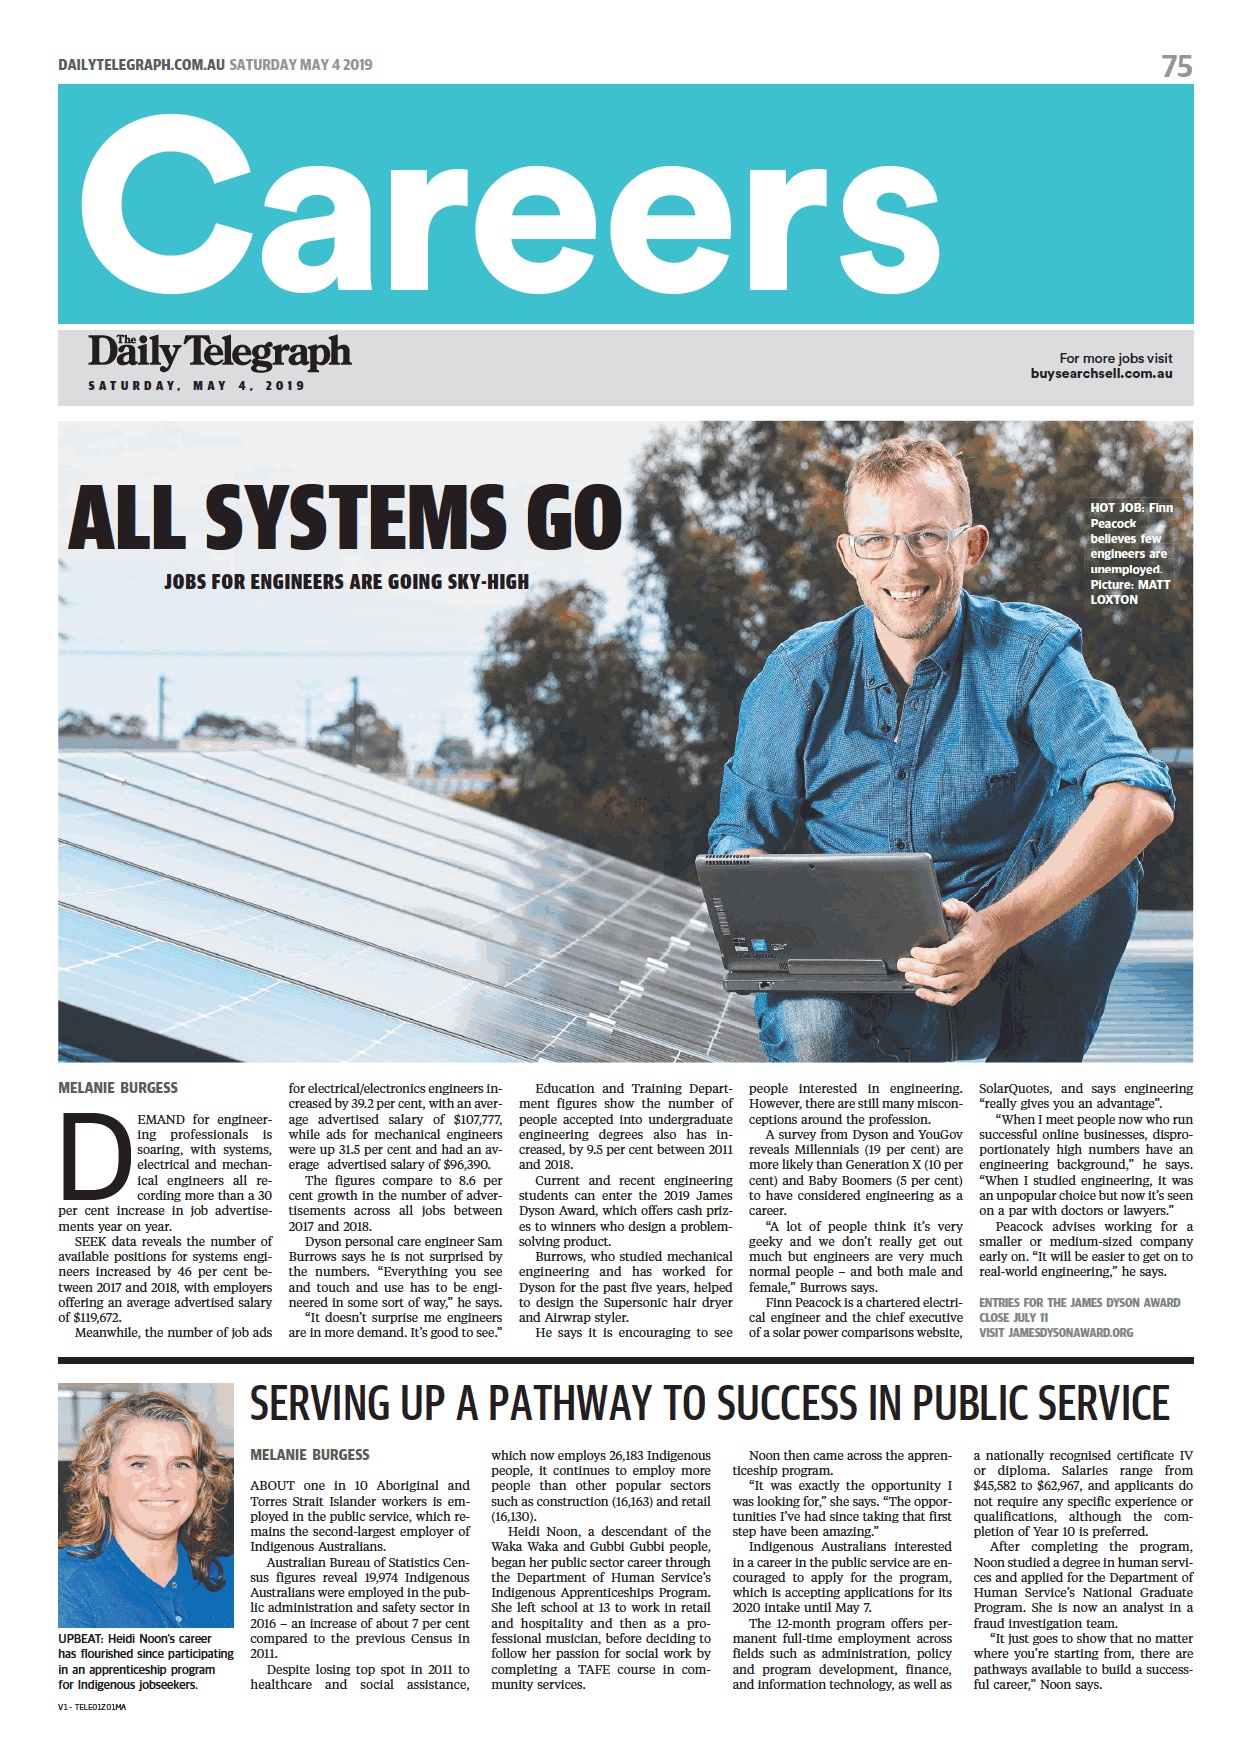 SolarQuotes - The Daily Telegraph (Careers Cover).png